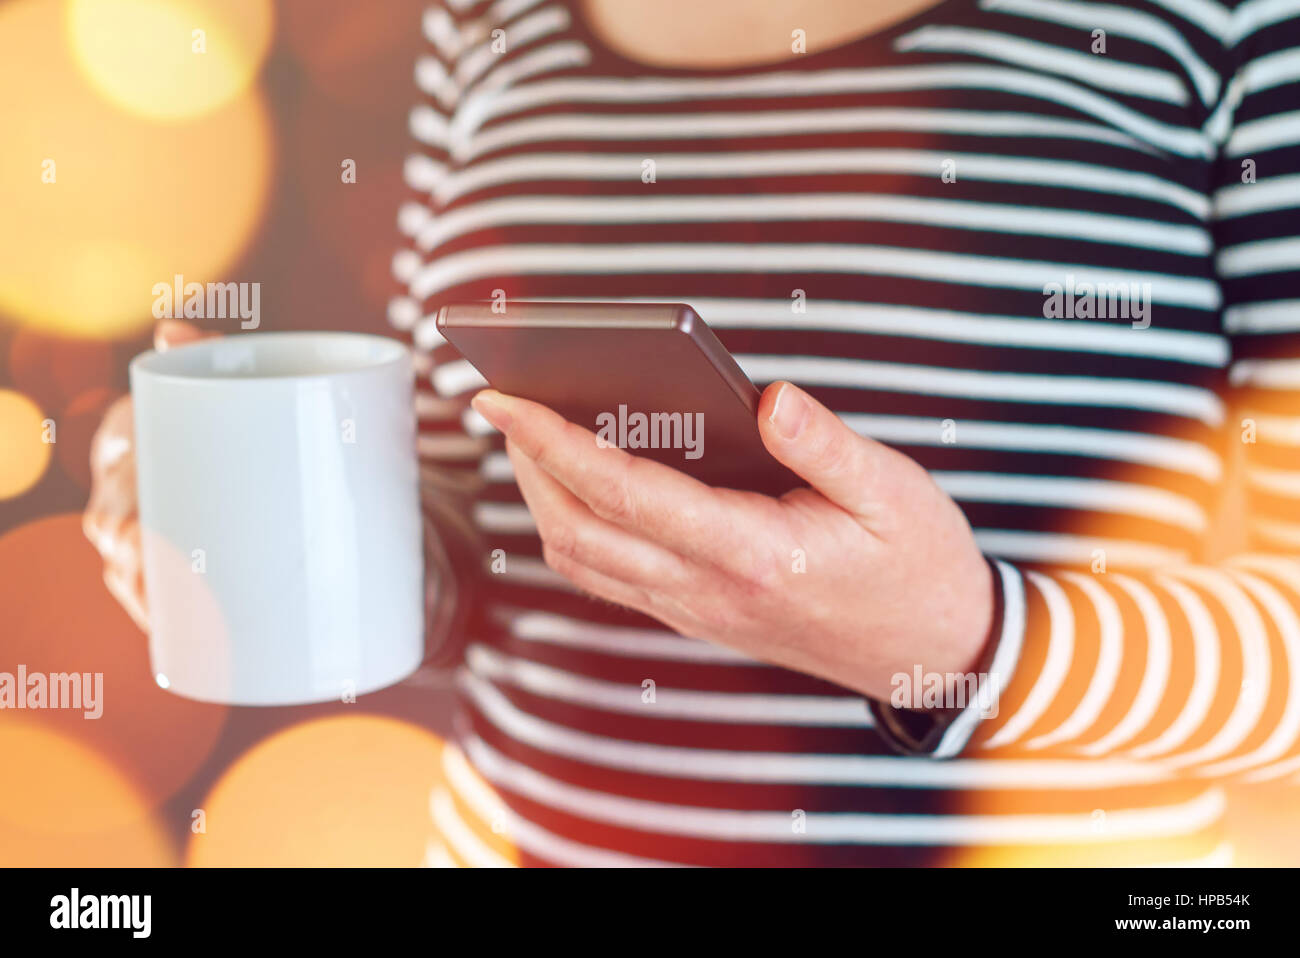 Casual female reading news on mobile phone and drinking coffee as part of everyday morning routine Stock Photo